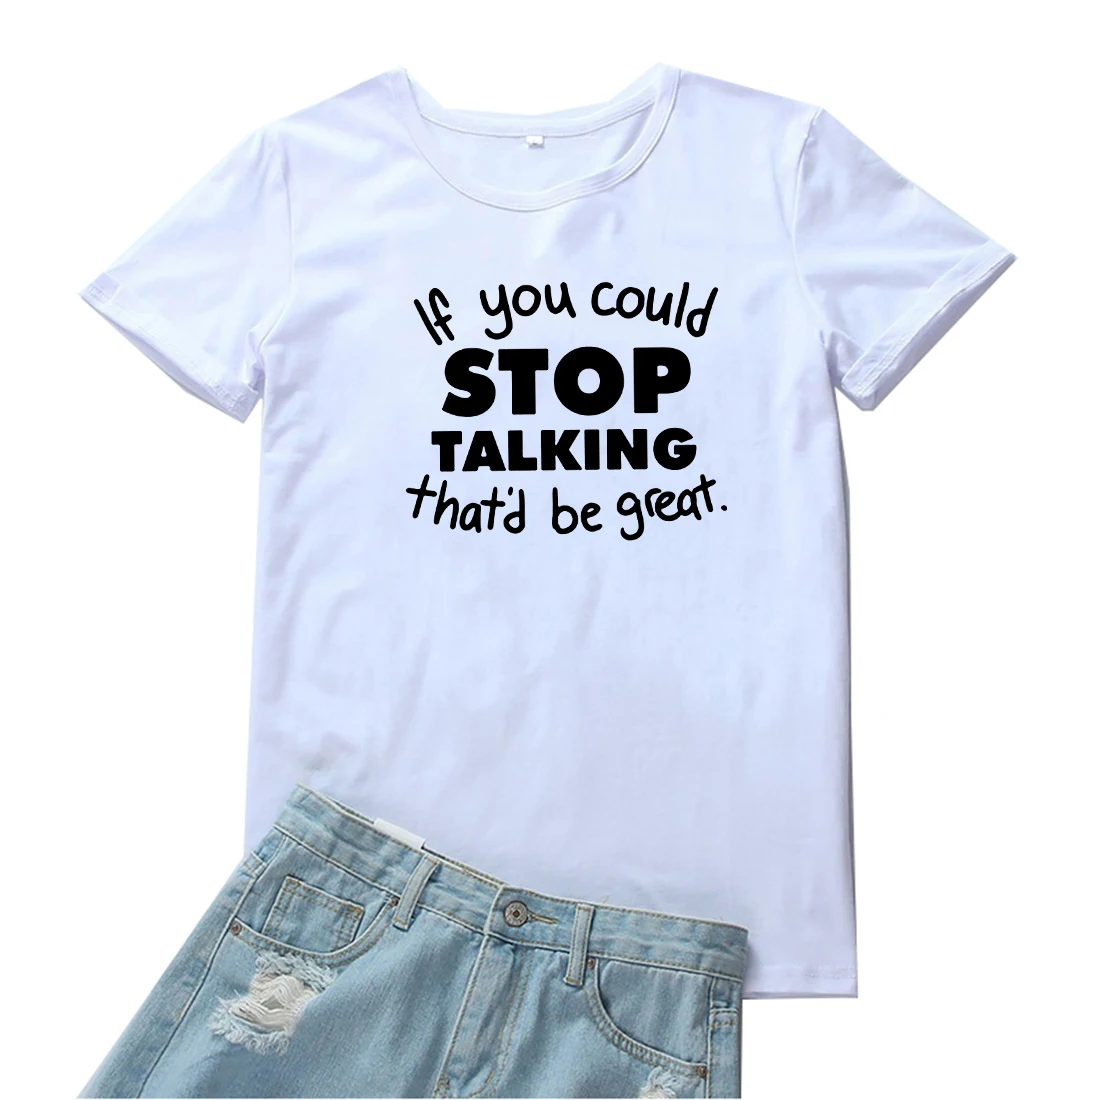 

If You Could Stop Talking That'd Be Great T-shirts Women Cotton Short Sleeves T Shirt for Women Funny Sayings Women Tshirt Tops